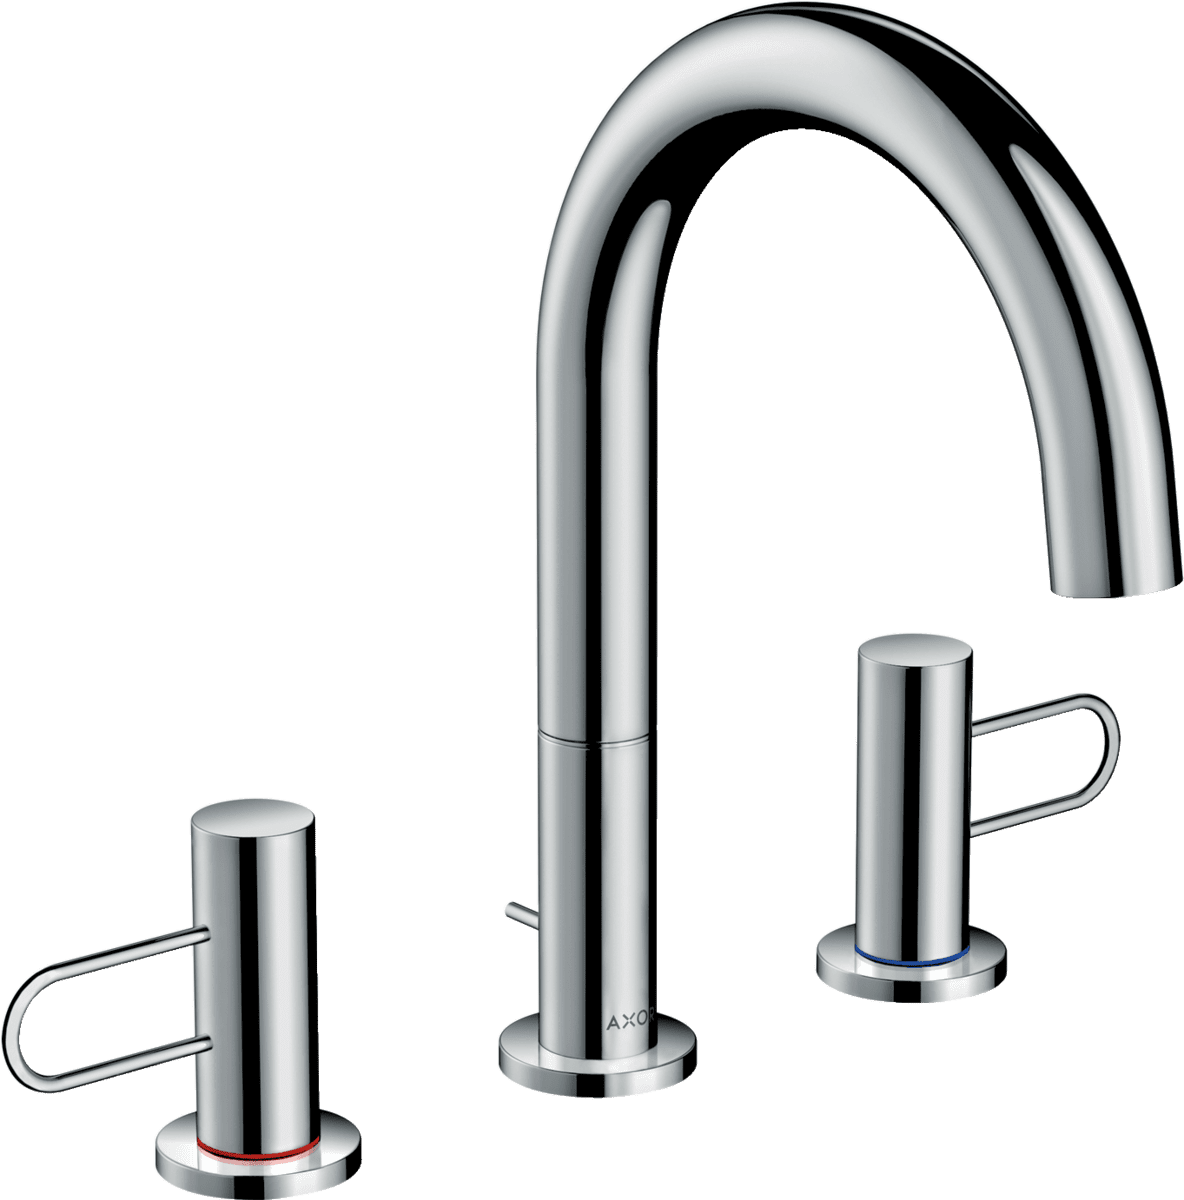 Picture of HANSGROHE AXOR Uno 3-hole basin mixer 160 with loop handles and pop-up waste set #38054000 - Chrome